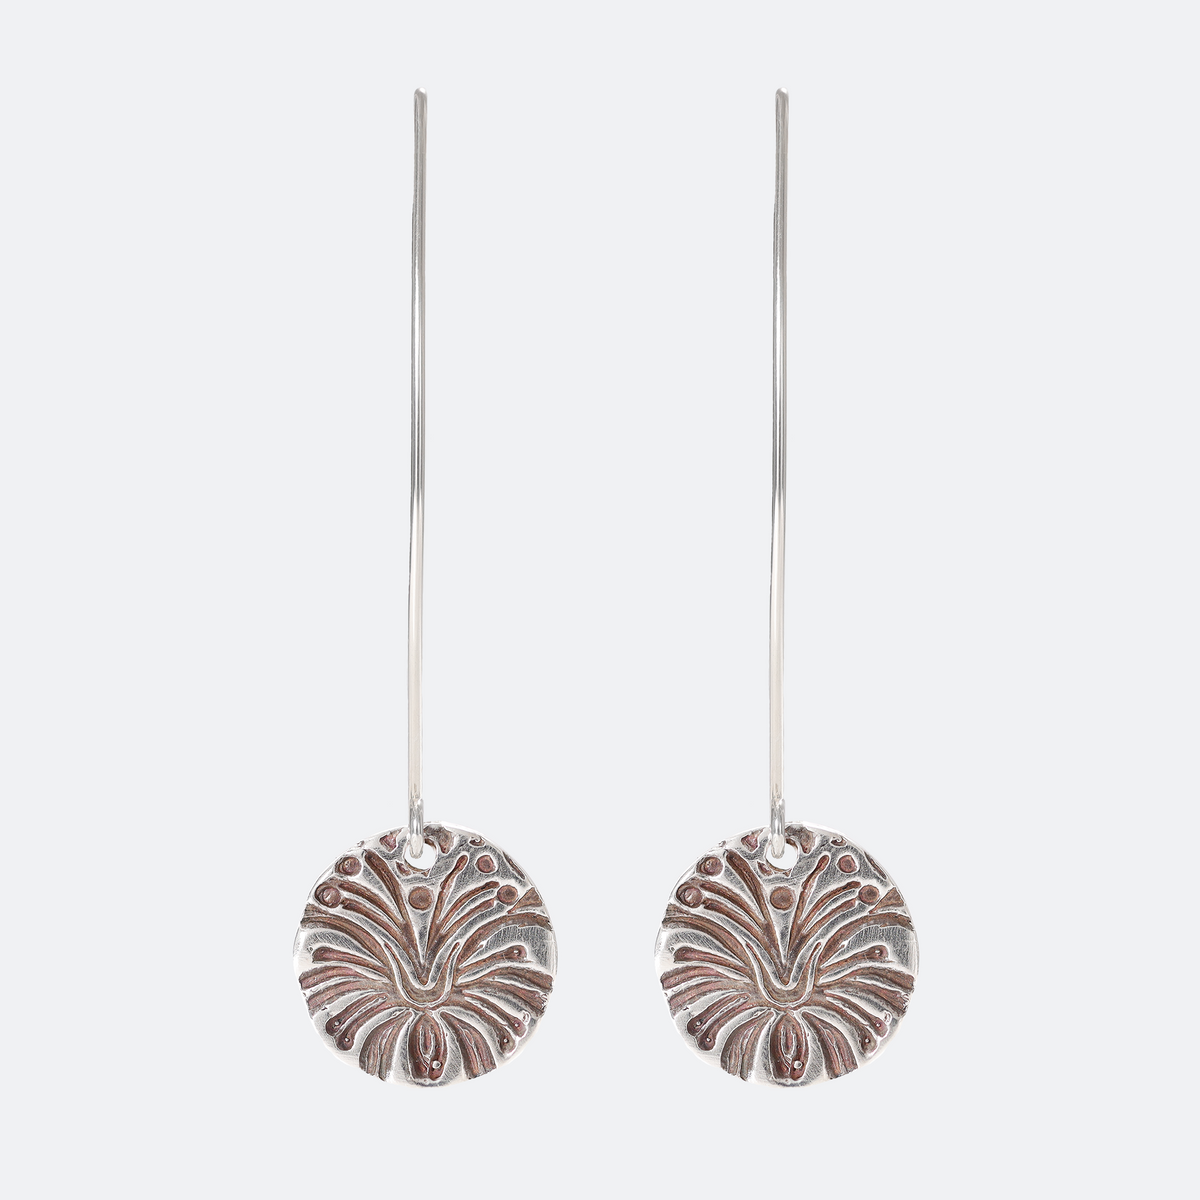 Hibiscus Textured Small Sterling Silver Earrings on Long Ear Wires